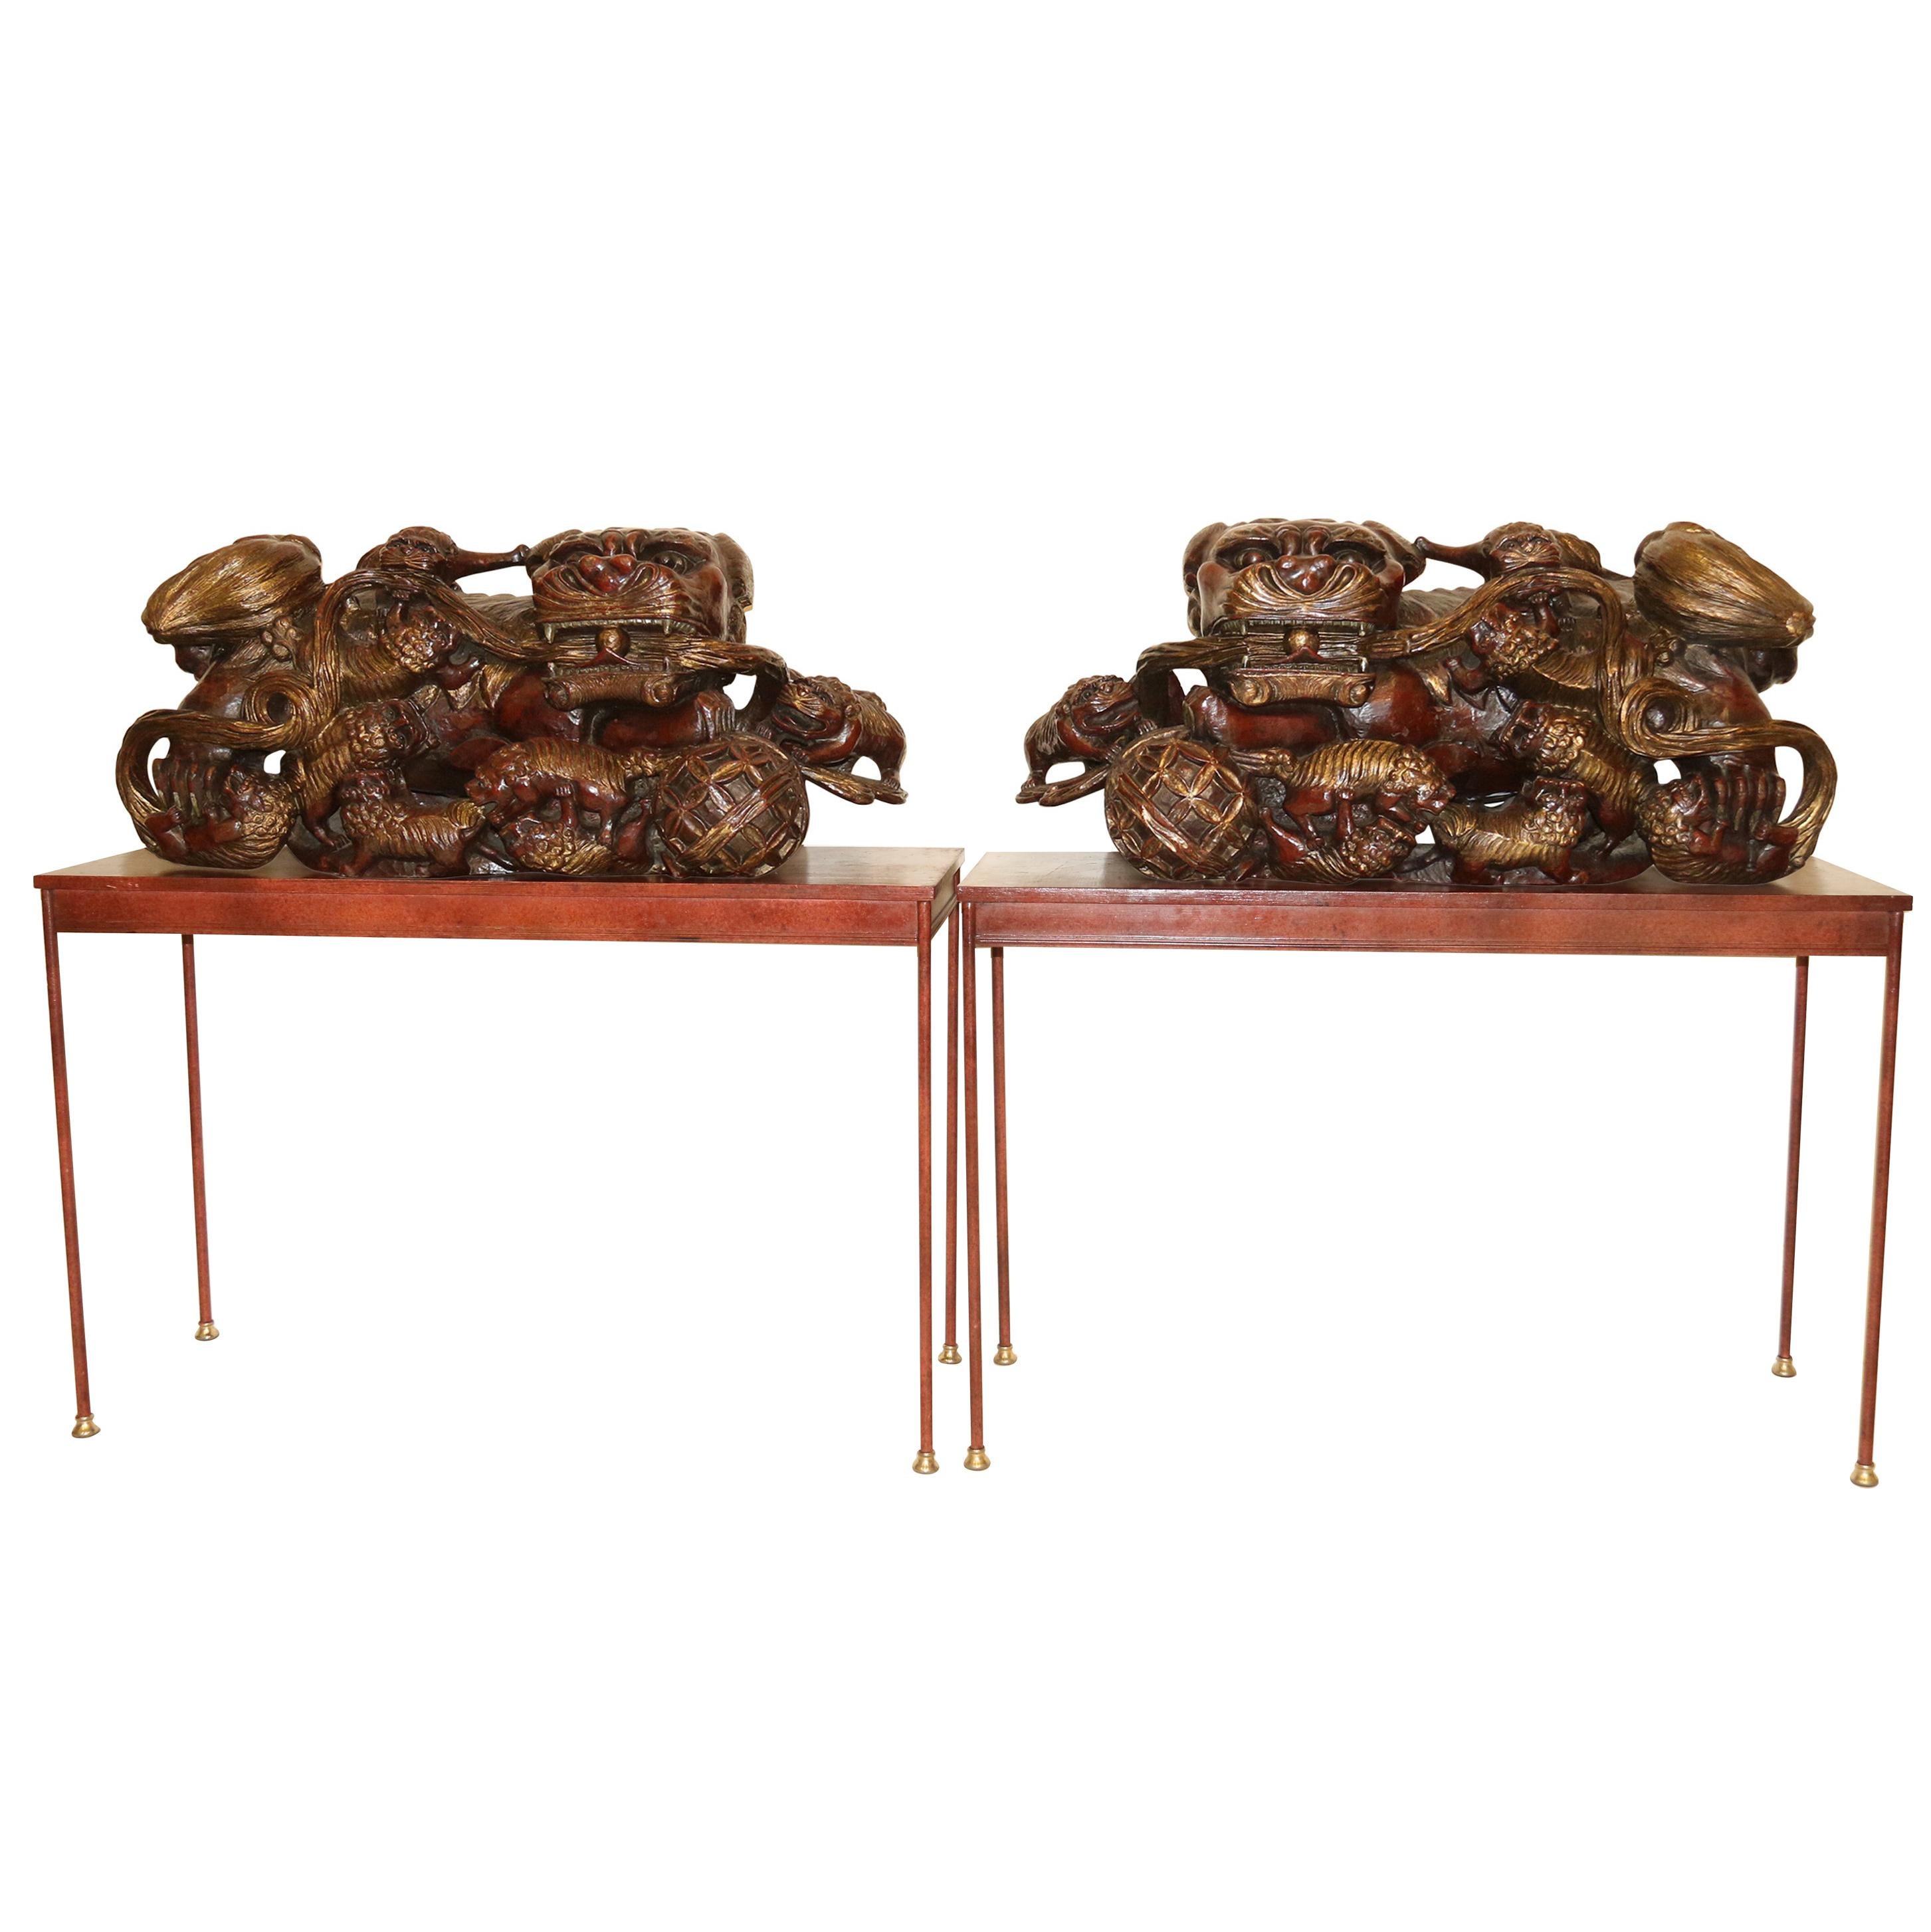 A Pair of 19th century hardwood Chinese Mythical Beasts/Dogs of Foo on Stands  For Sale